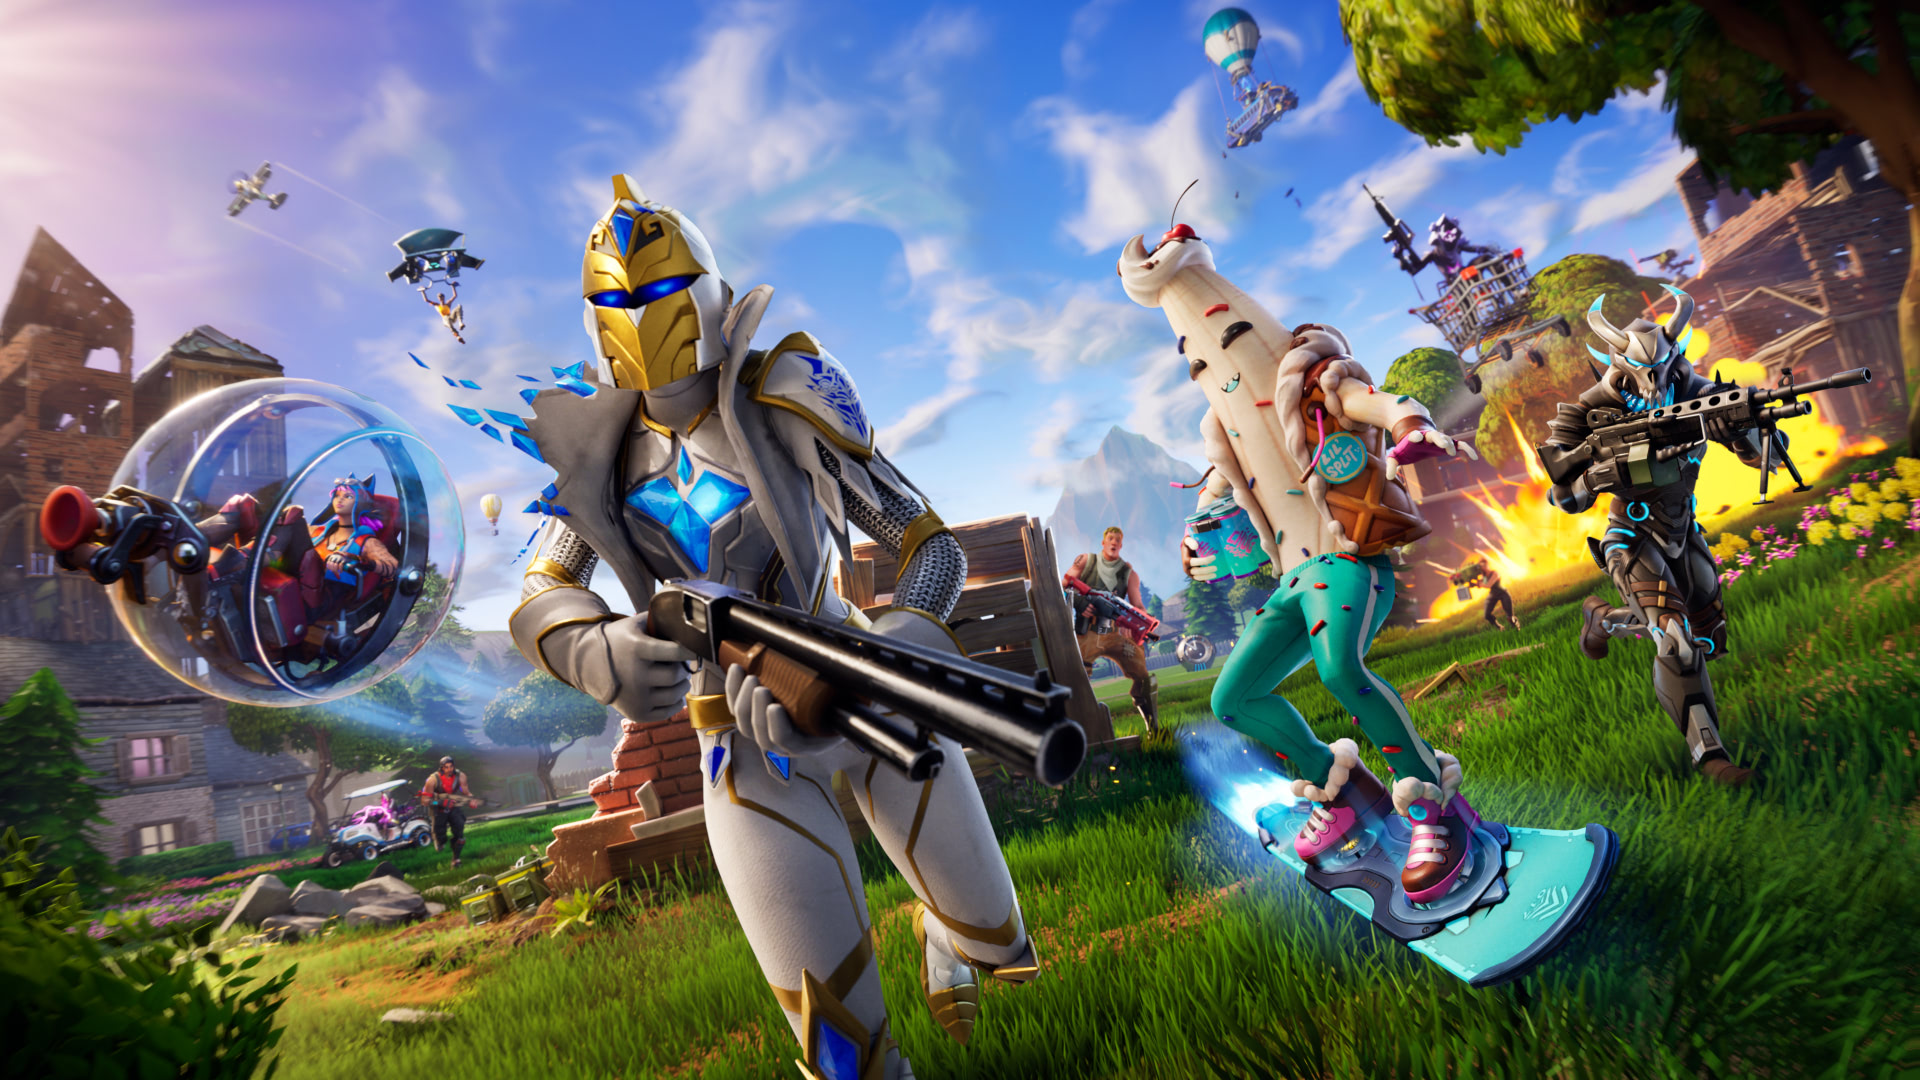 Artwork for Fortnite OG, featuring a variety of characters running or rolling toward the camera